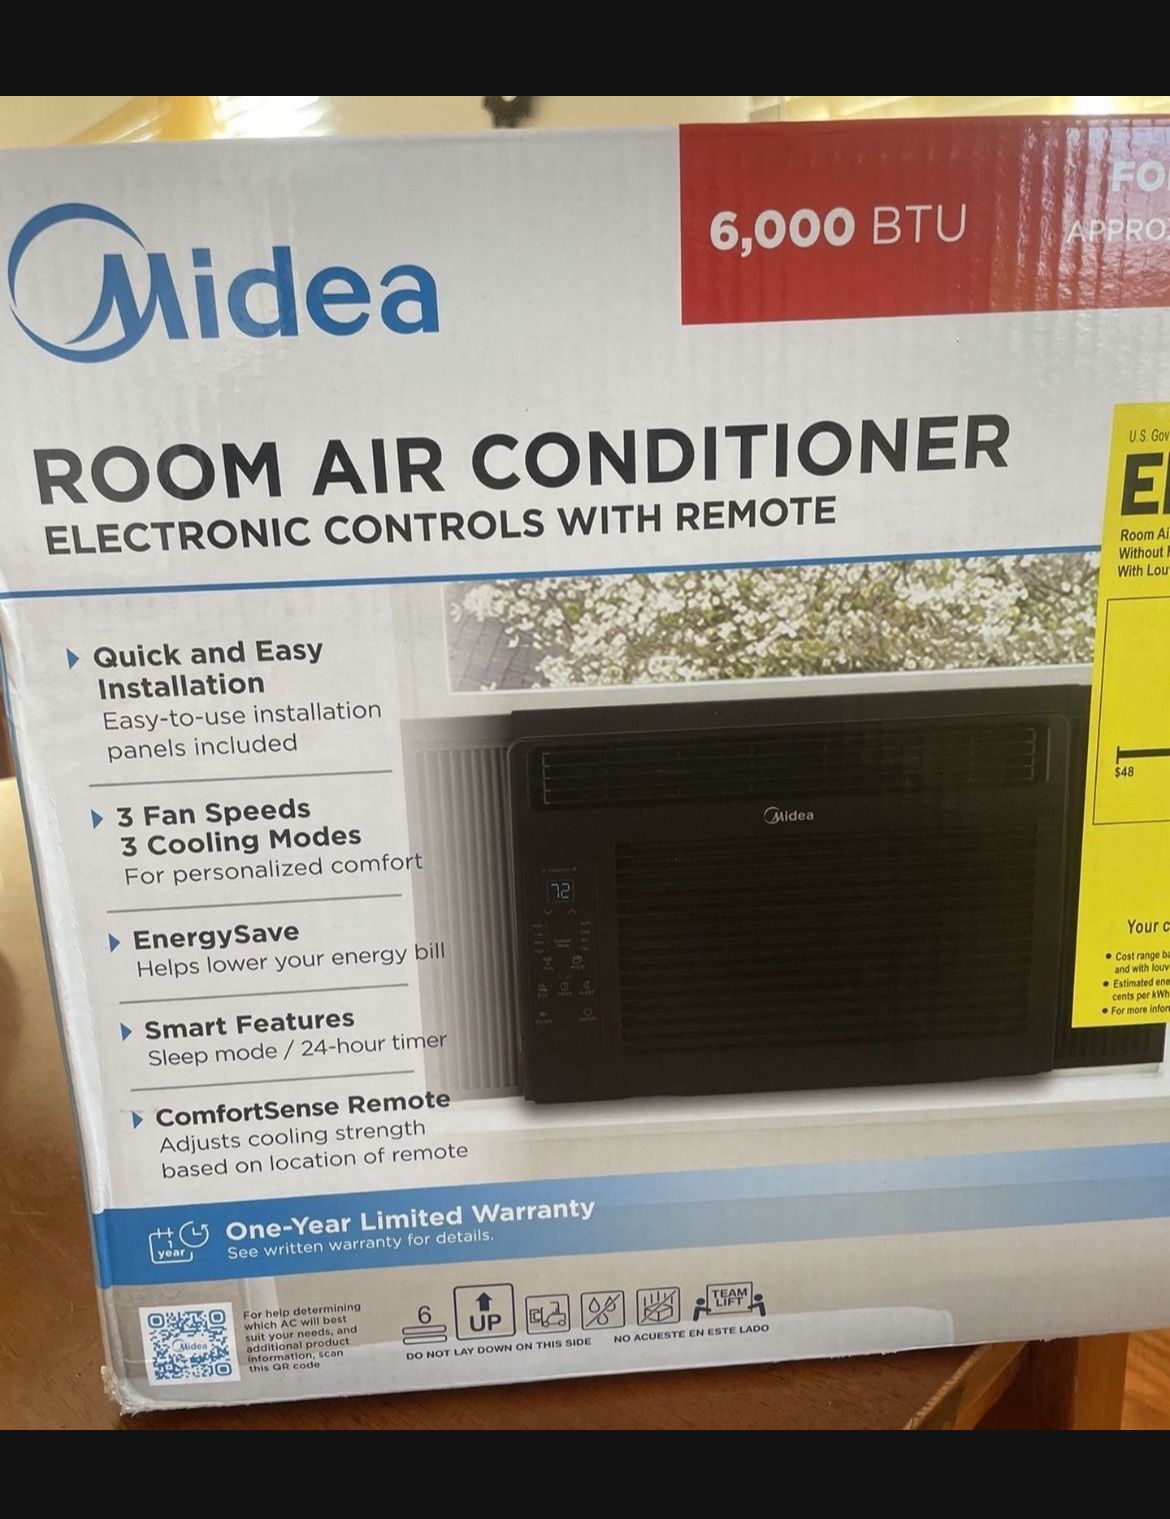 On Sale New Midea 6,000 BTU 115V Window Air Conditioner with ComfortSense Remote,$$$225 Dollars Firm Price in San Leandro,,,,